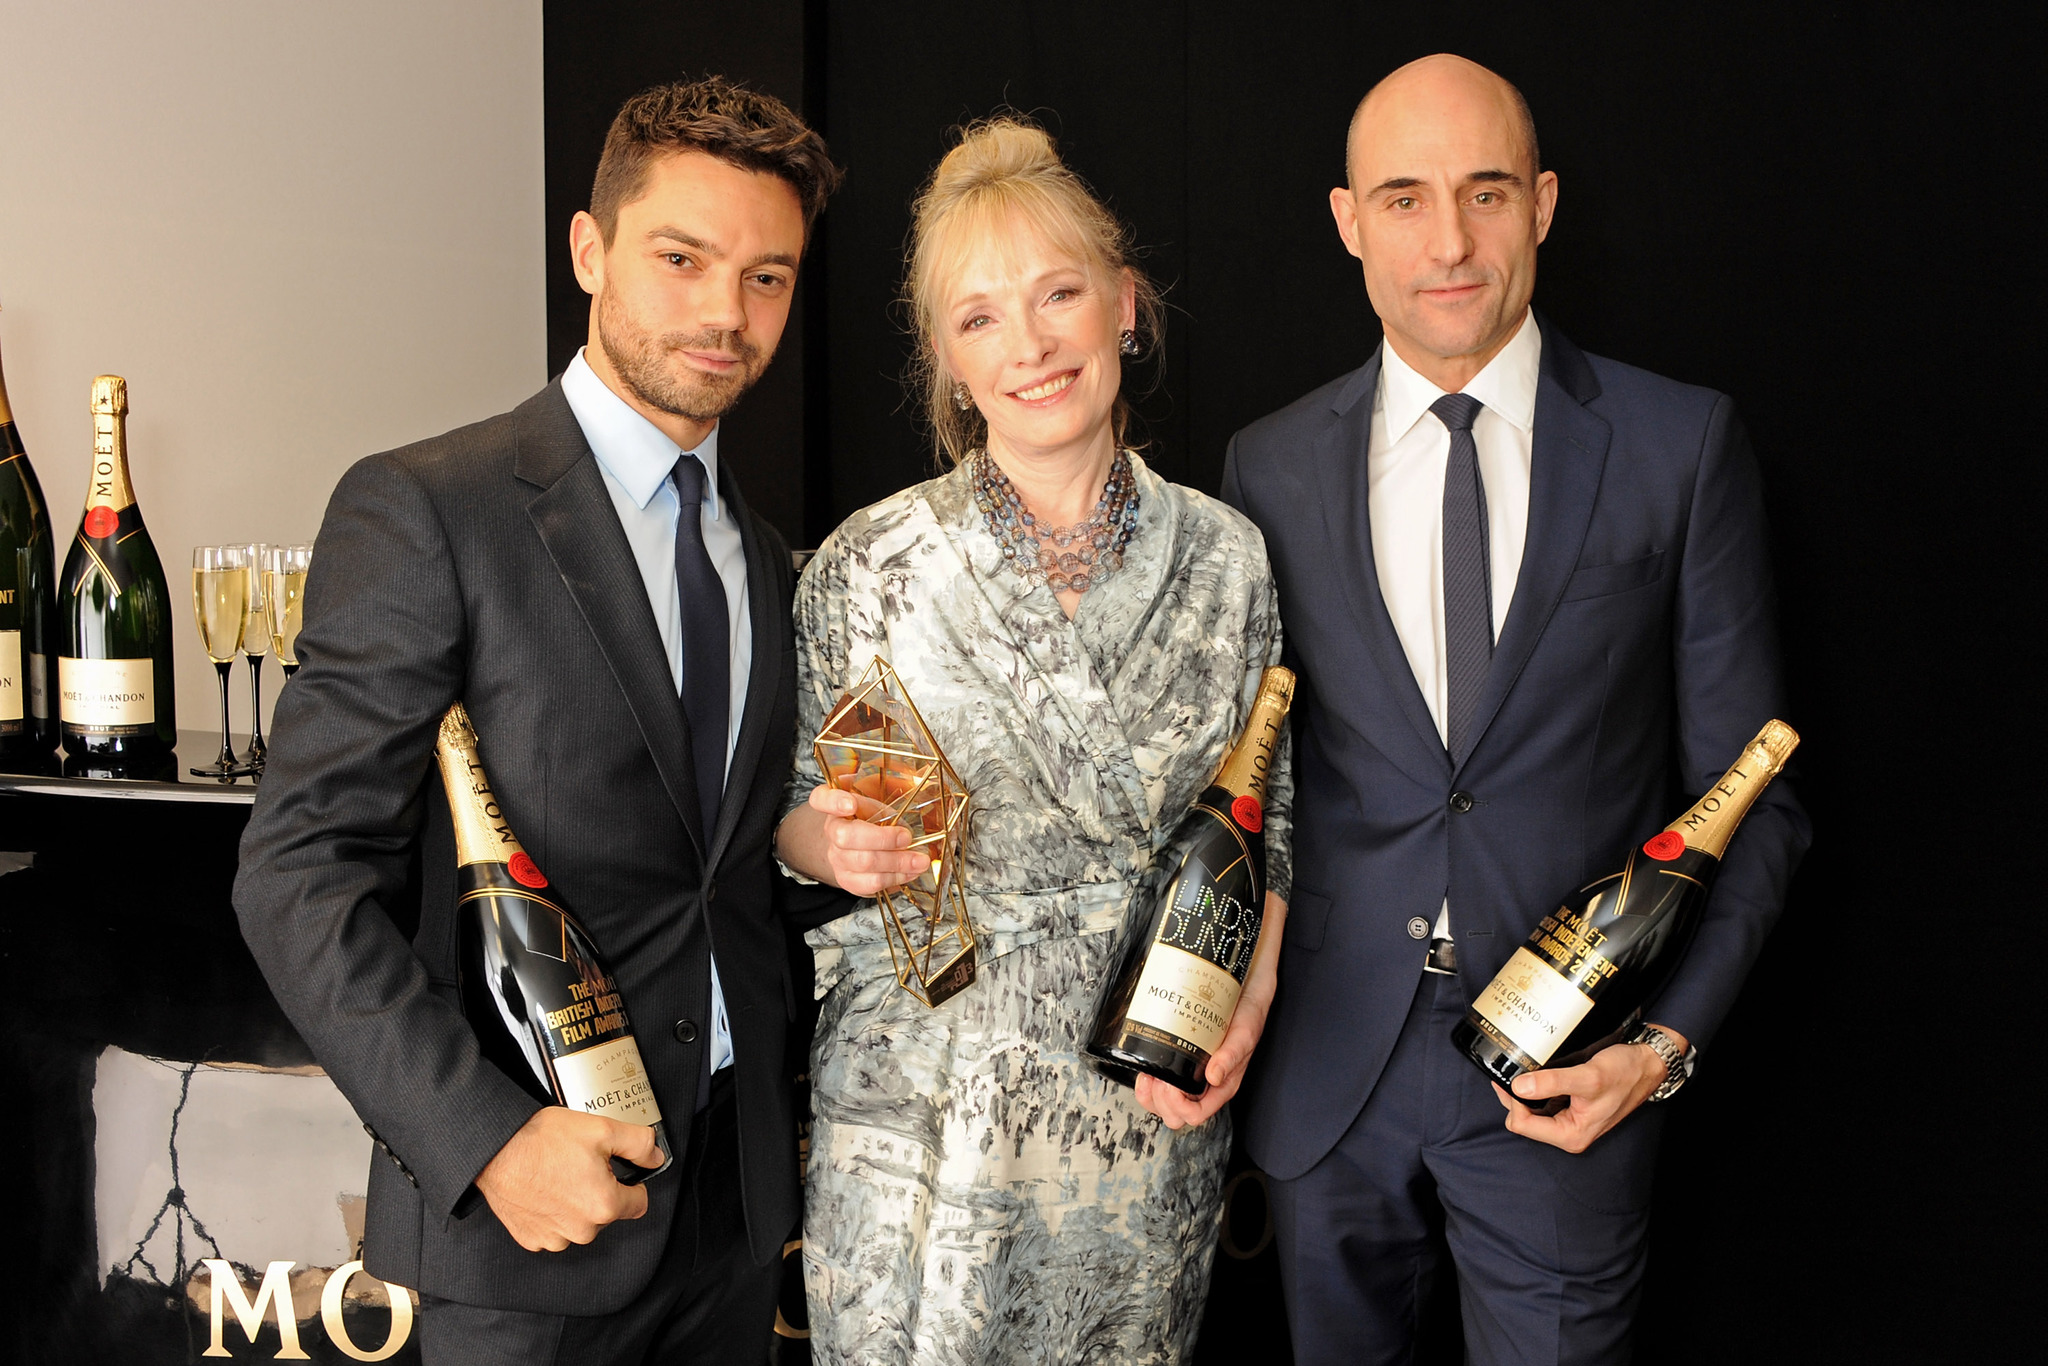 Lindsay Duncan, Mark Strong and Dominic Cooper